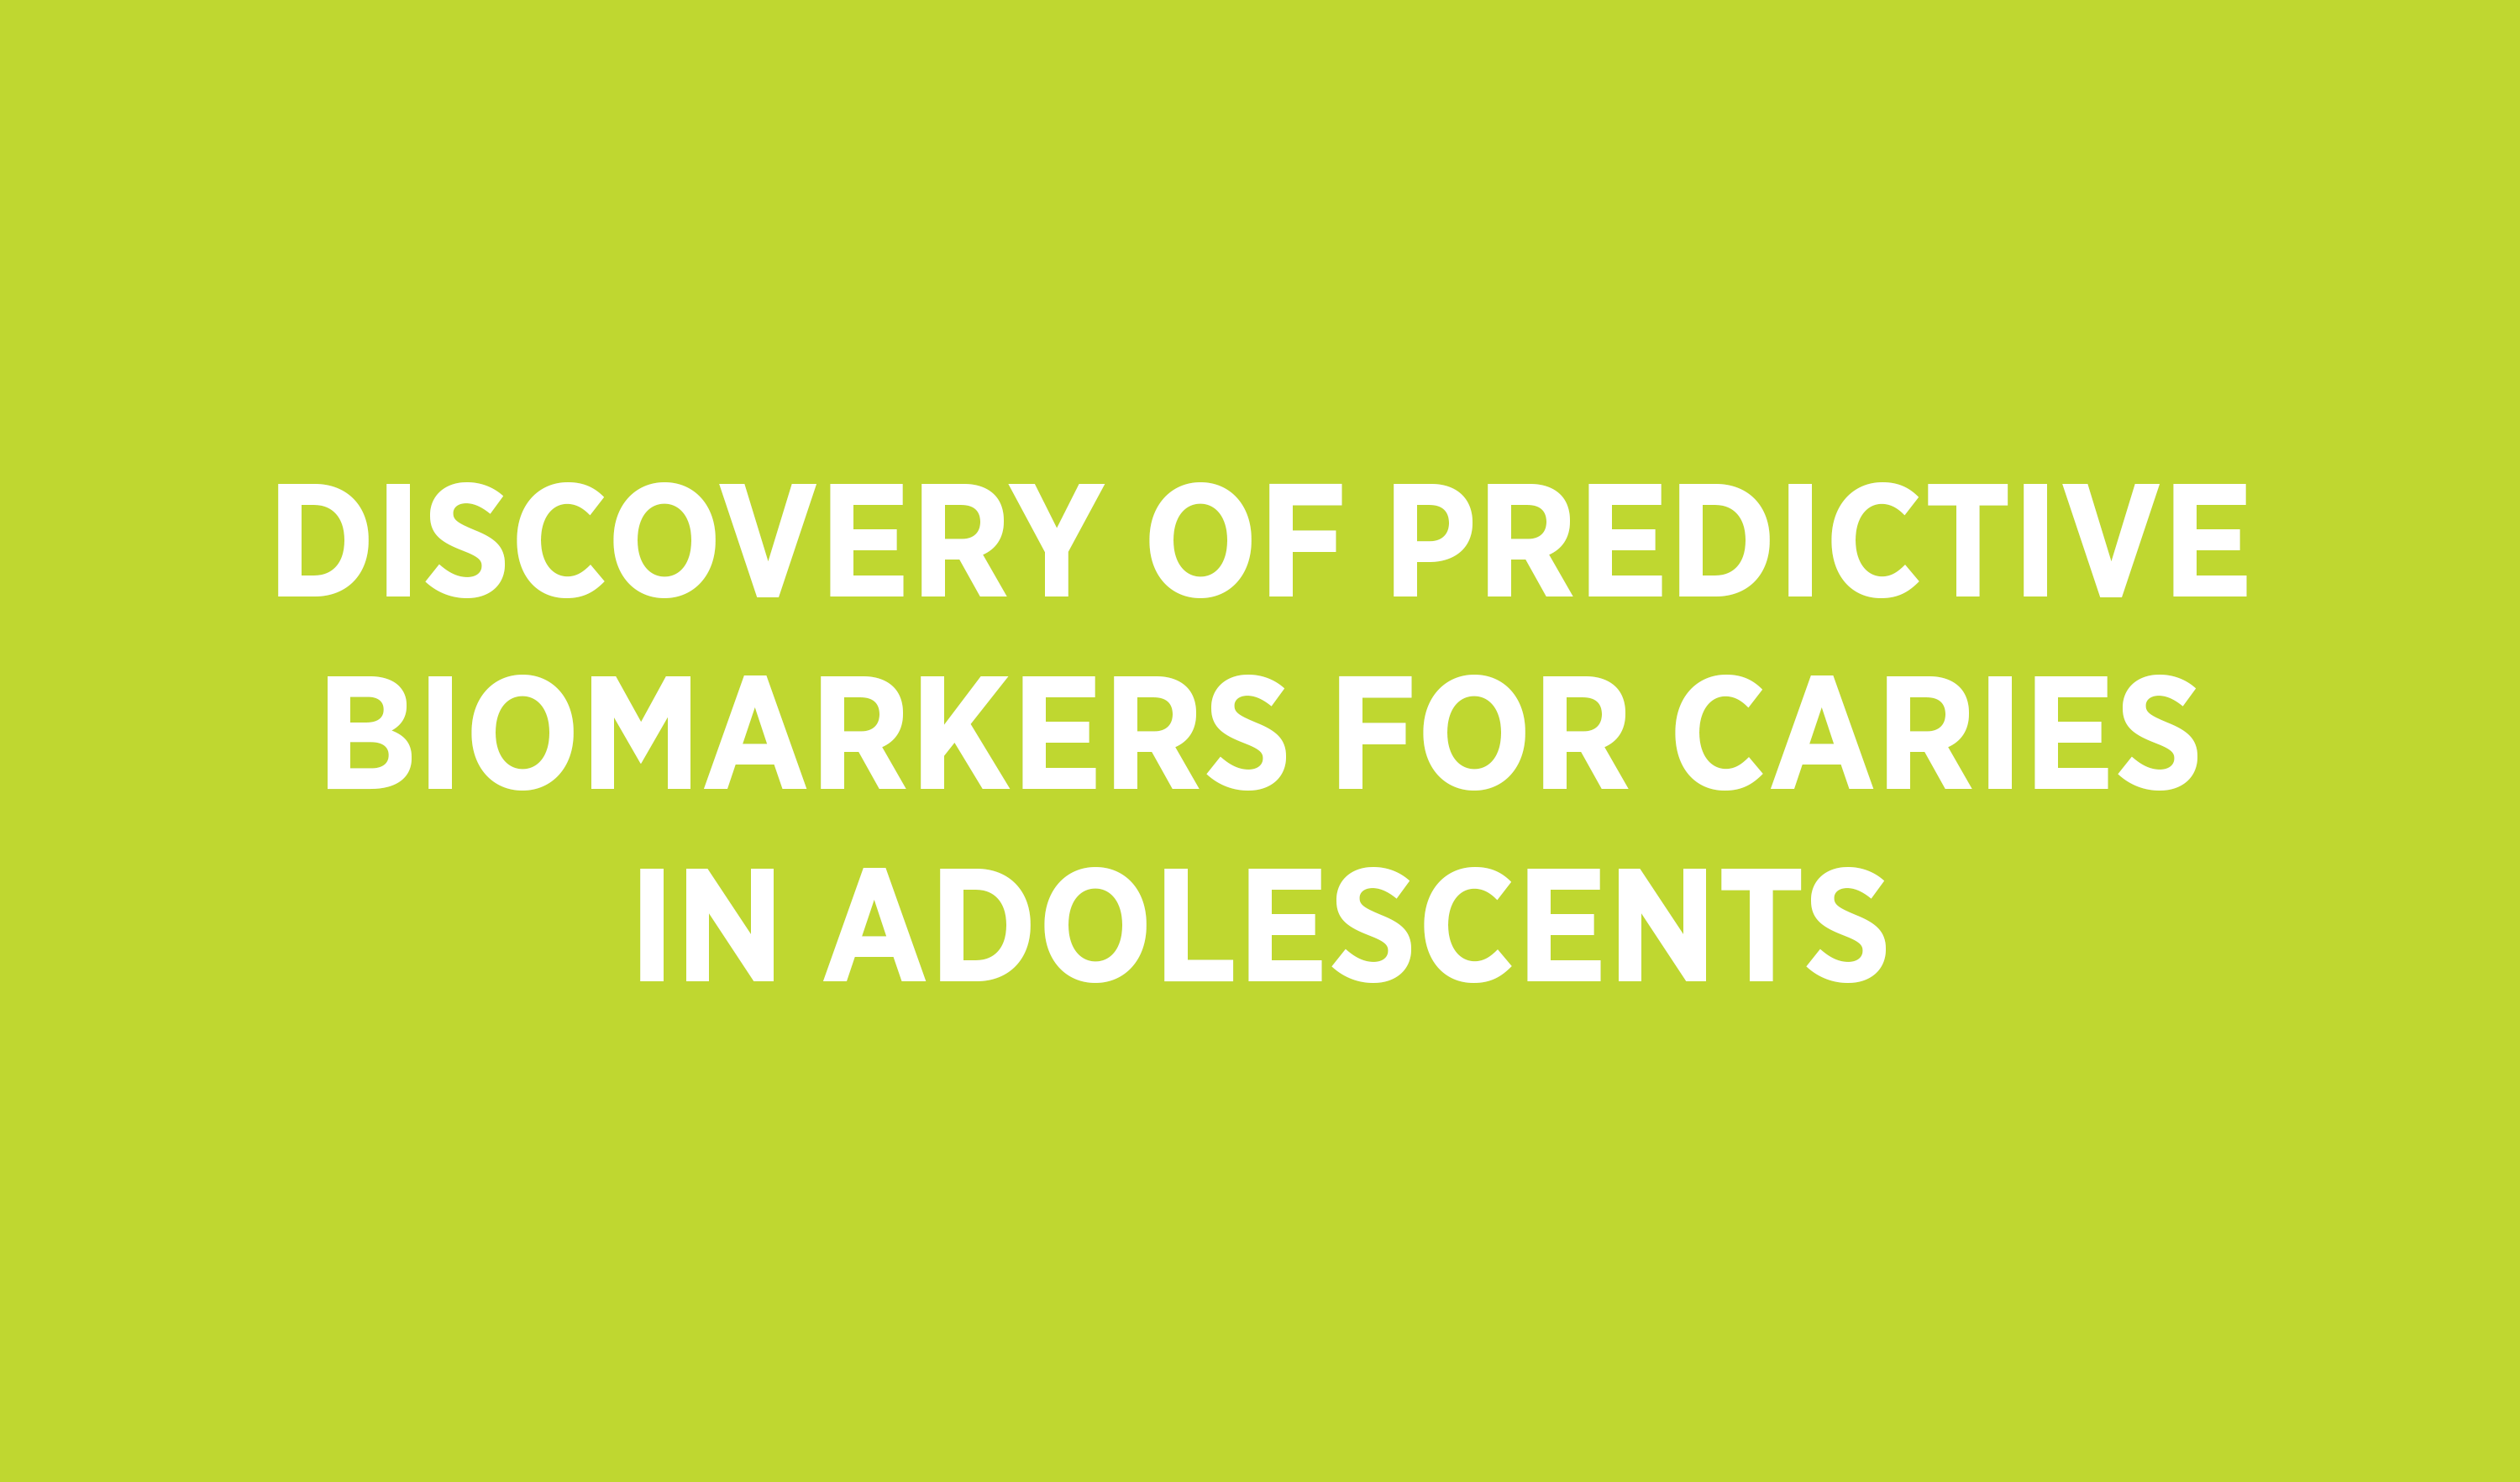 Grön bakgrund med texten "Discovery of predictive biomarkers for caries in adolescents".